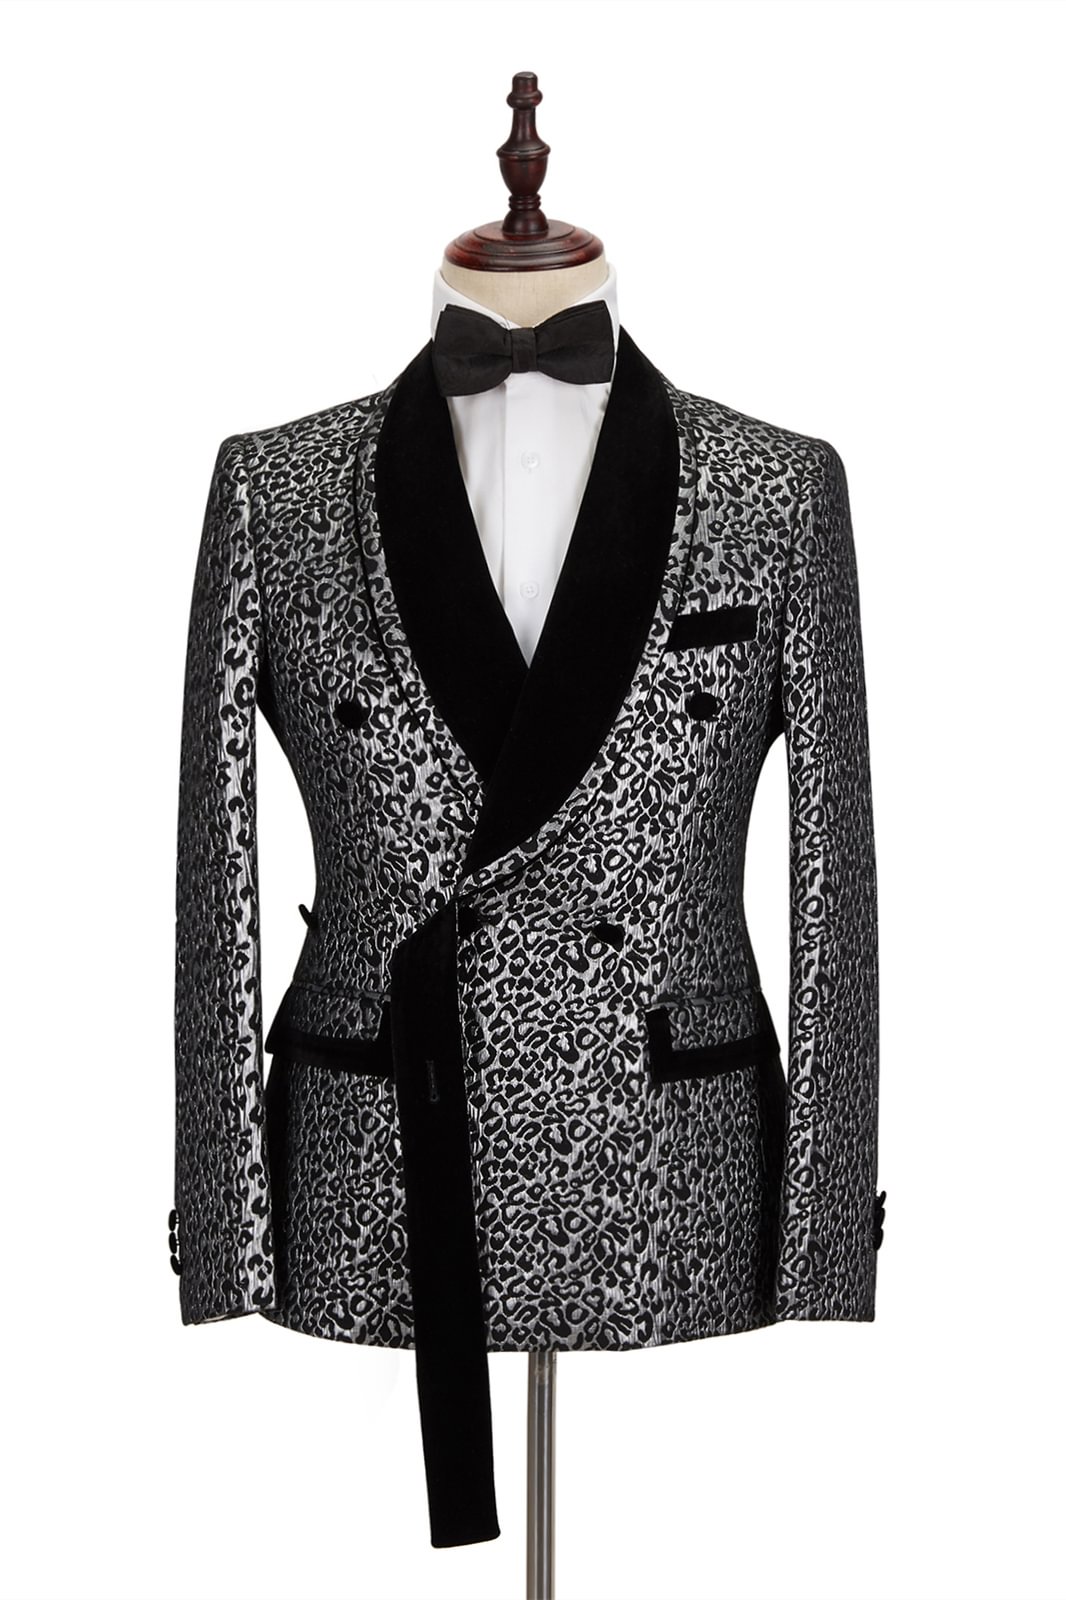 Silver Leopard Jacquard Black Stitching Men's Suit Shawl Lapel Double Breasted Formal With Shirt | Ballbellas Ballbellas